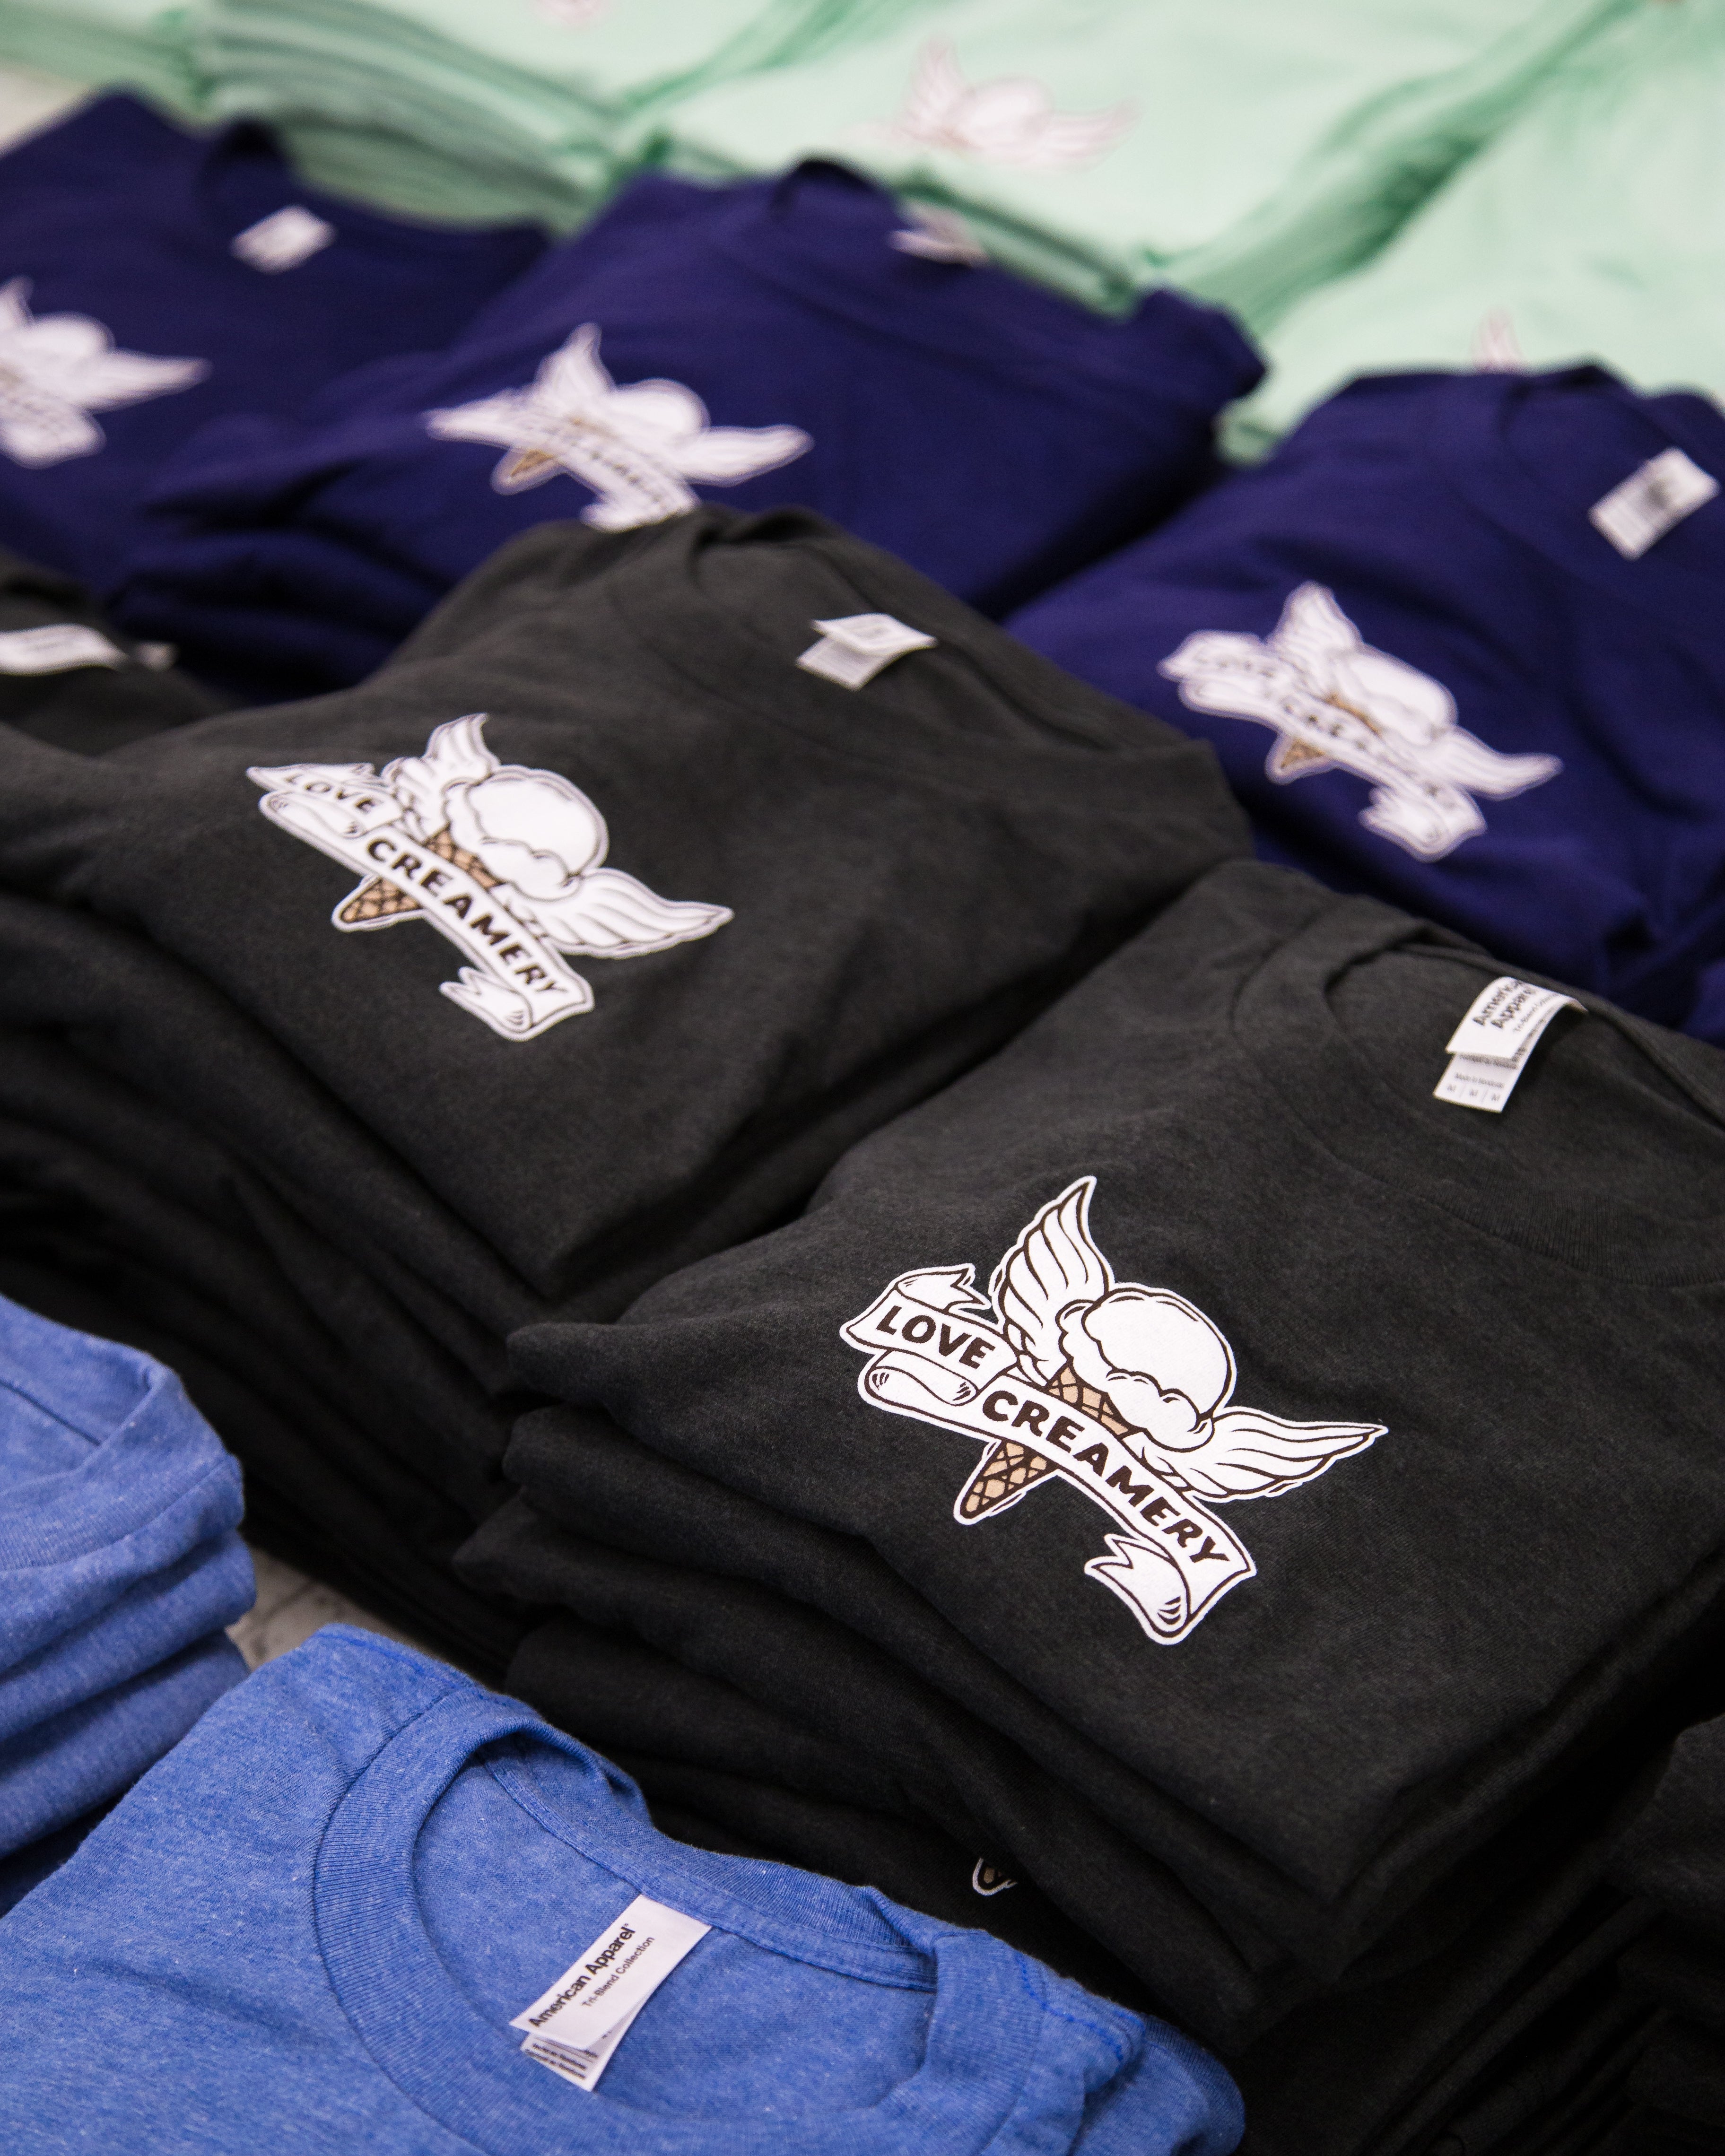 Folded T-shirts with Duluth's Love Creamery logo printed on them.